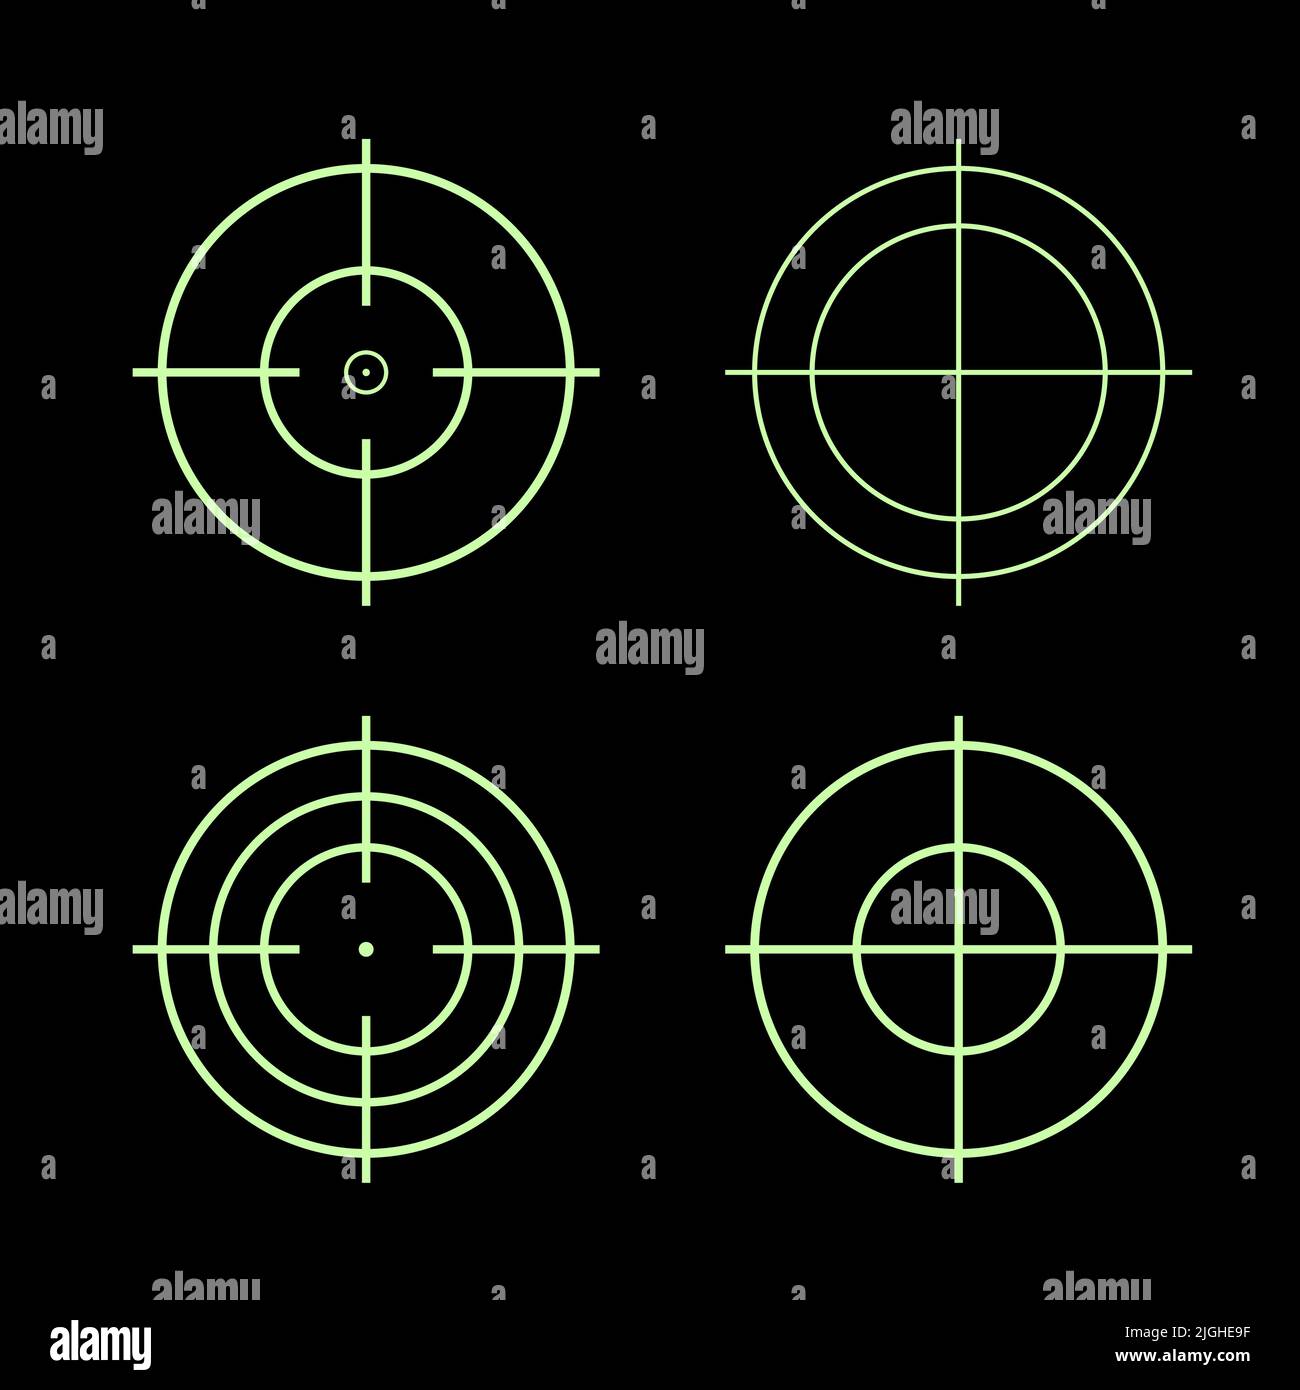 Vector crosshair set. Crosshair icons for sniper rifle in video game. Stock Vector